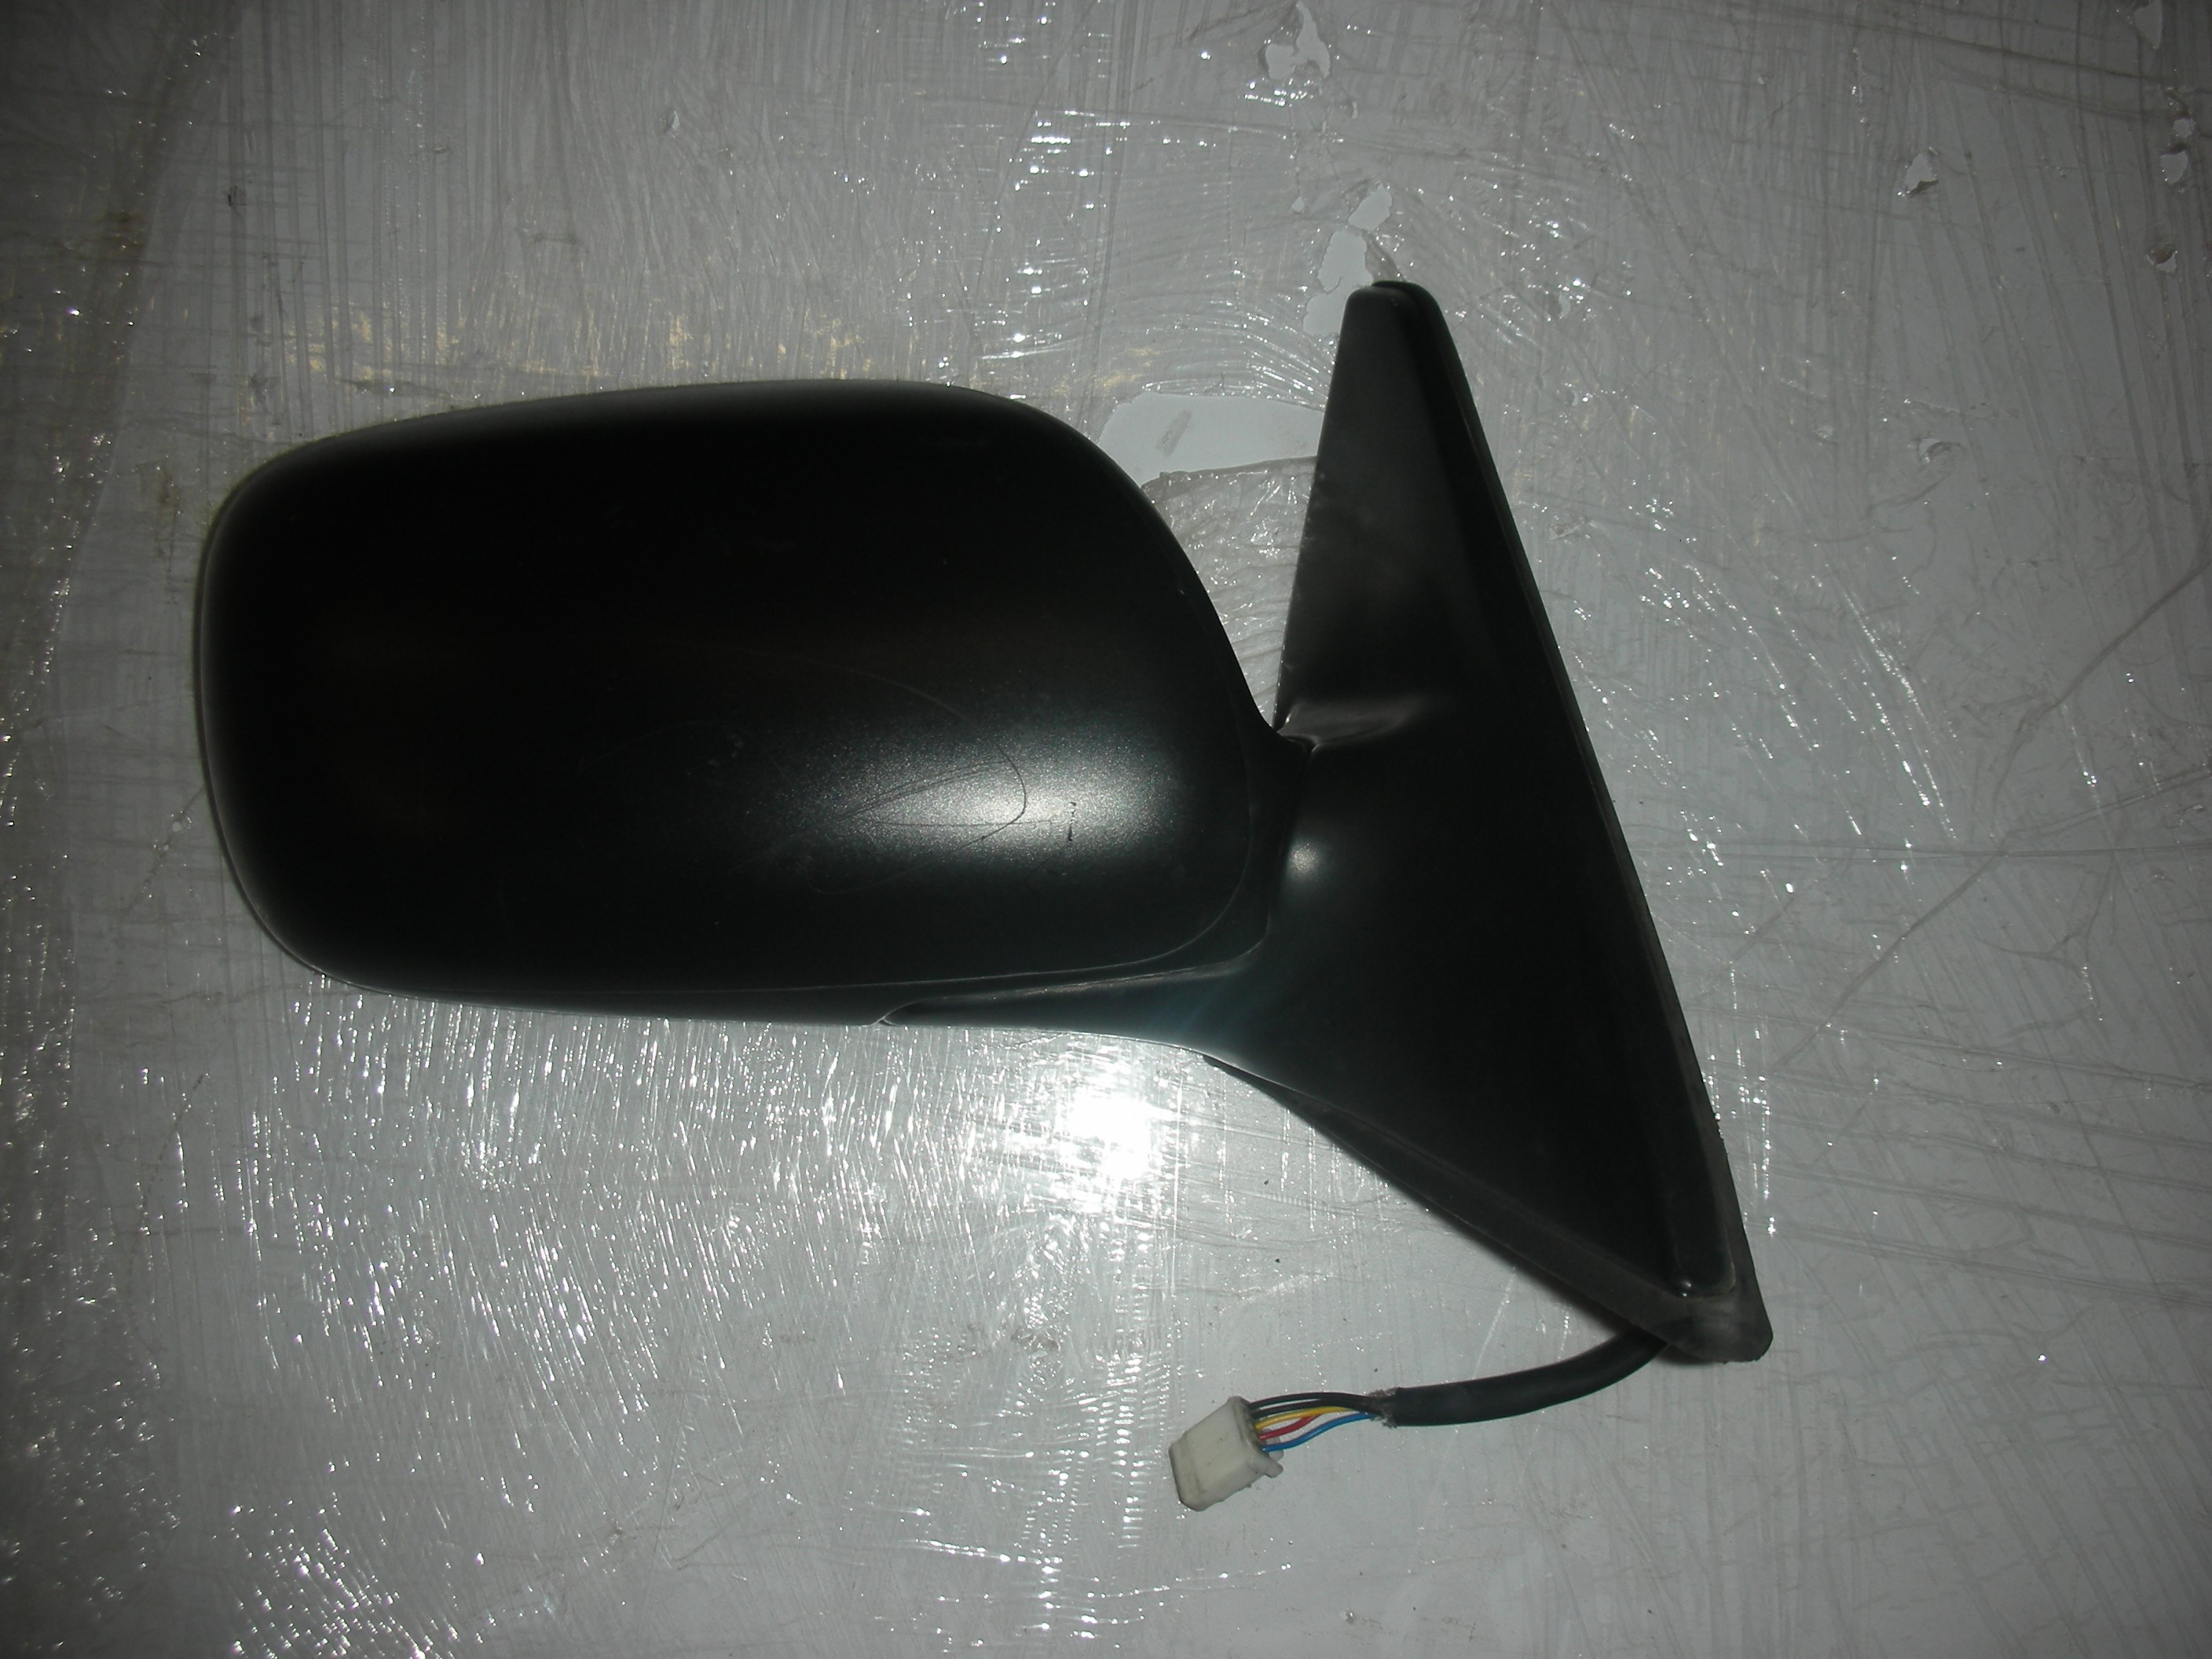 TOYOTA AVENSIS DRIVER SIDE FRONT ELECTRIC DOOR MIRROR 2001-2003.